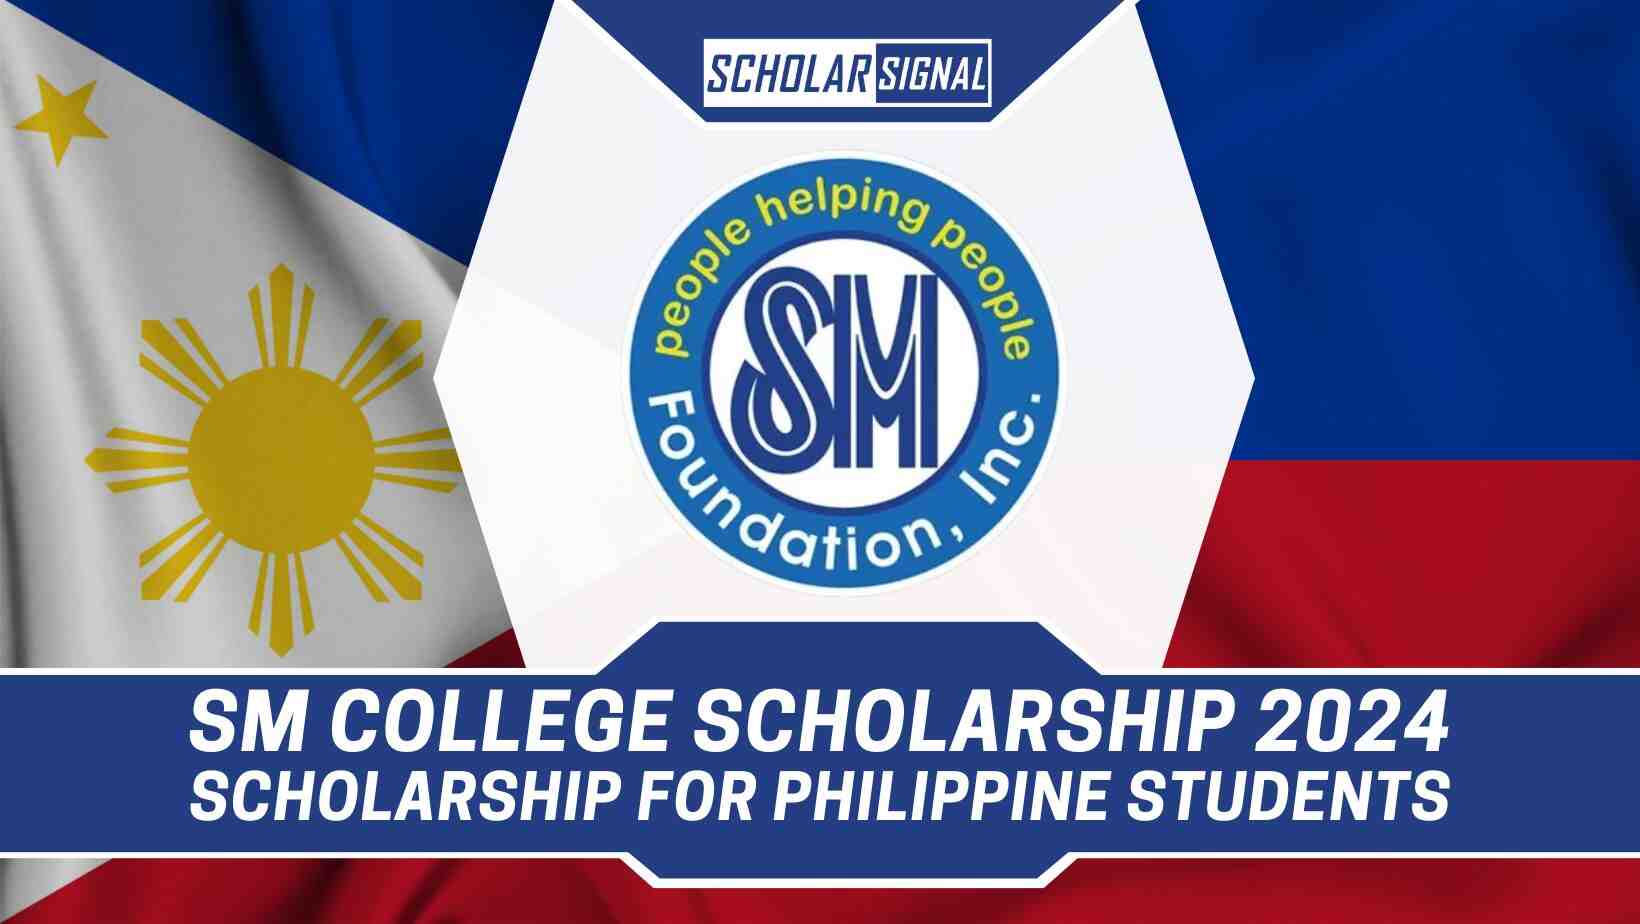 SM College Scholarship 2024: Empower Philippine Students Education